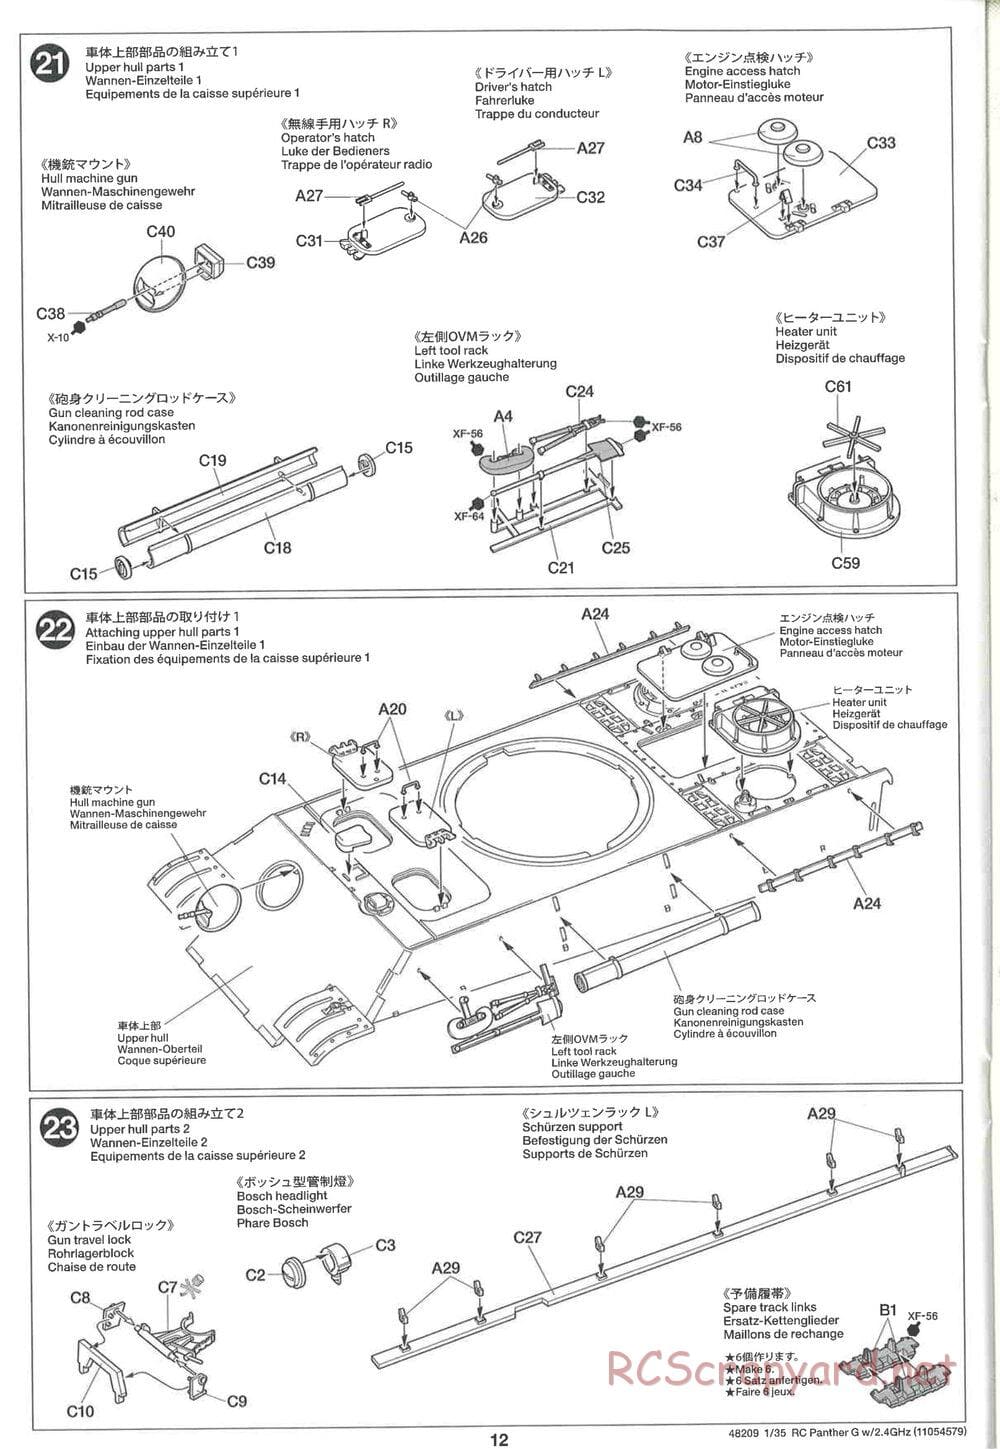 Tamiya - German Panther Type G - Late Version - 1/35 Scale Chassis - Manual - Page 12